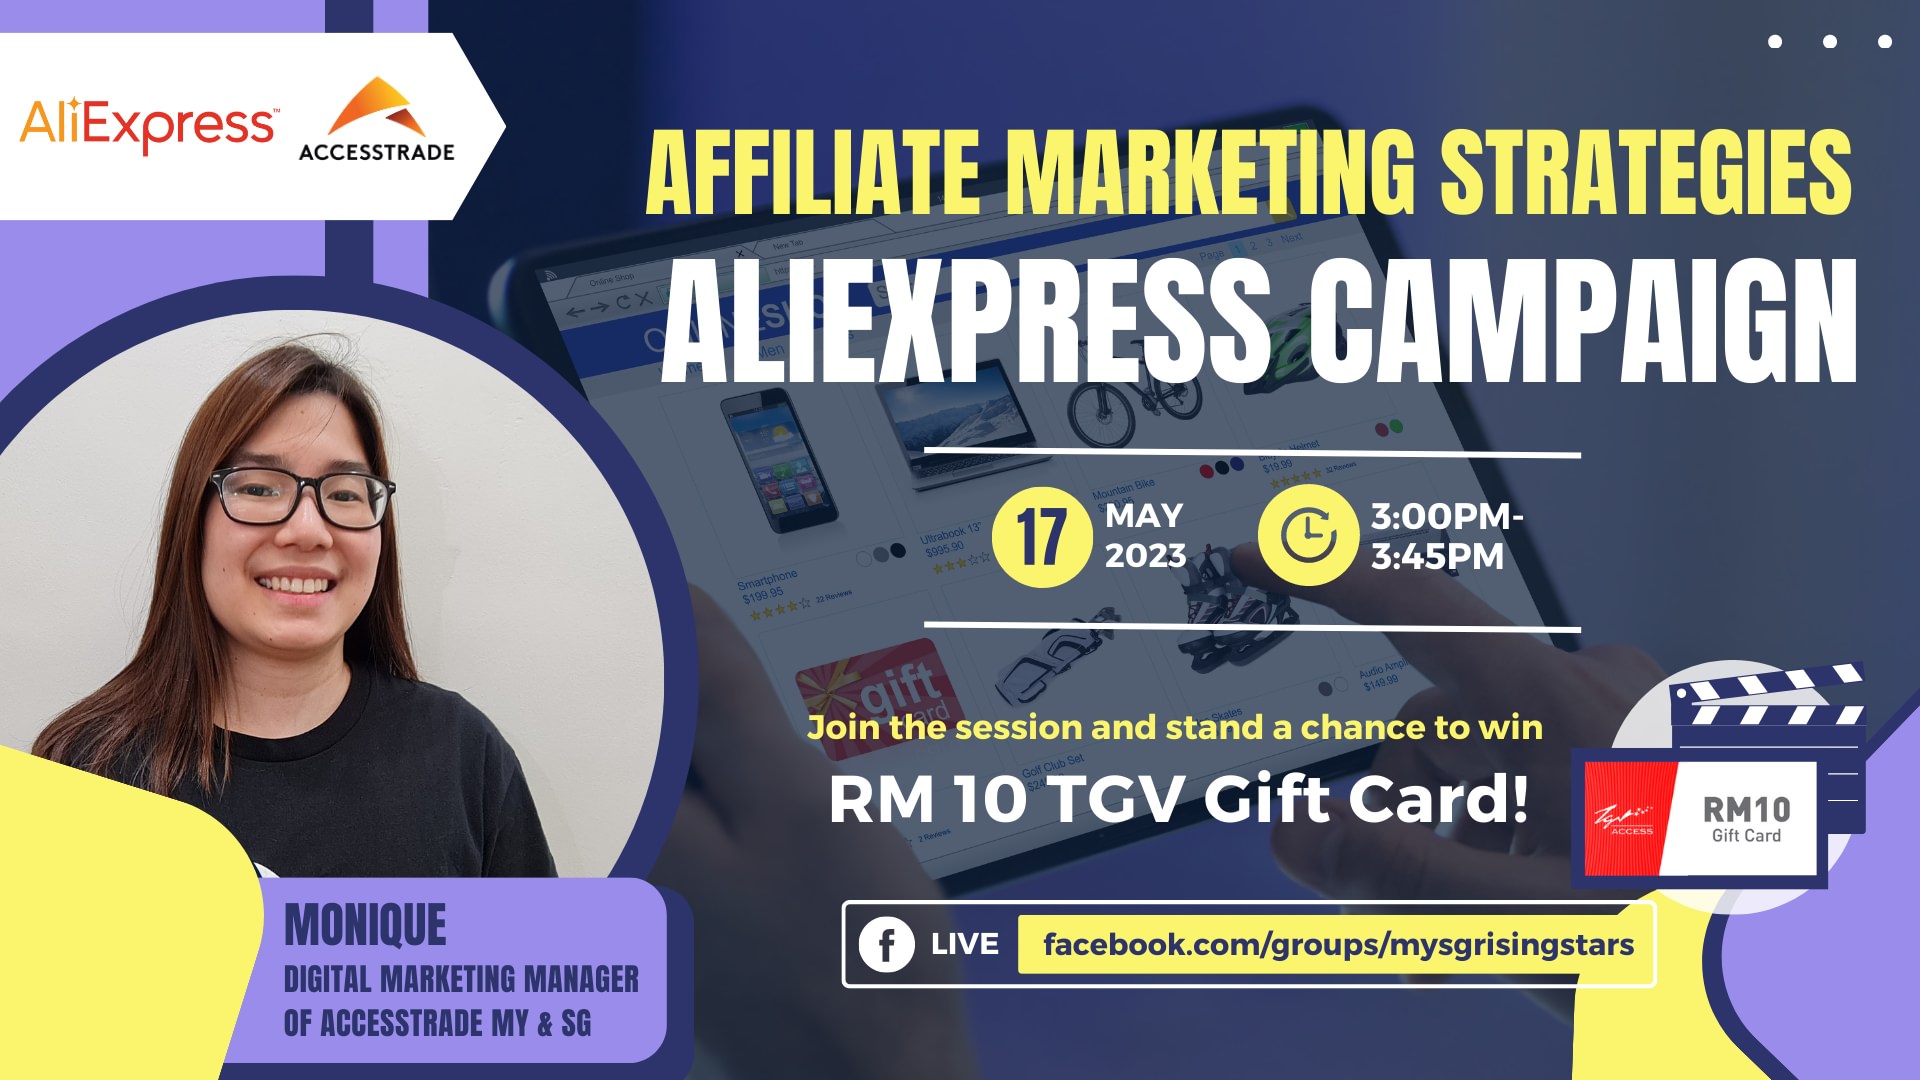 Affiliate Marketing Strategies for AliExpress Campaign